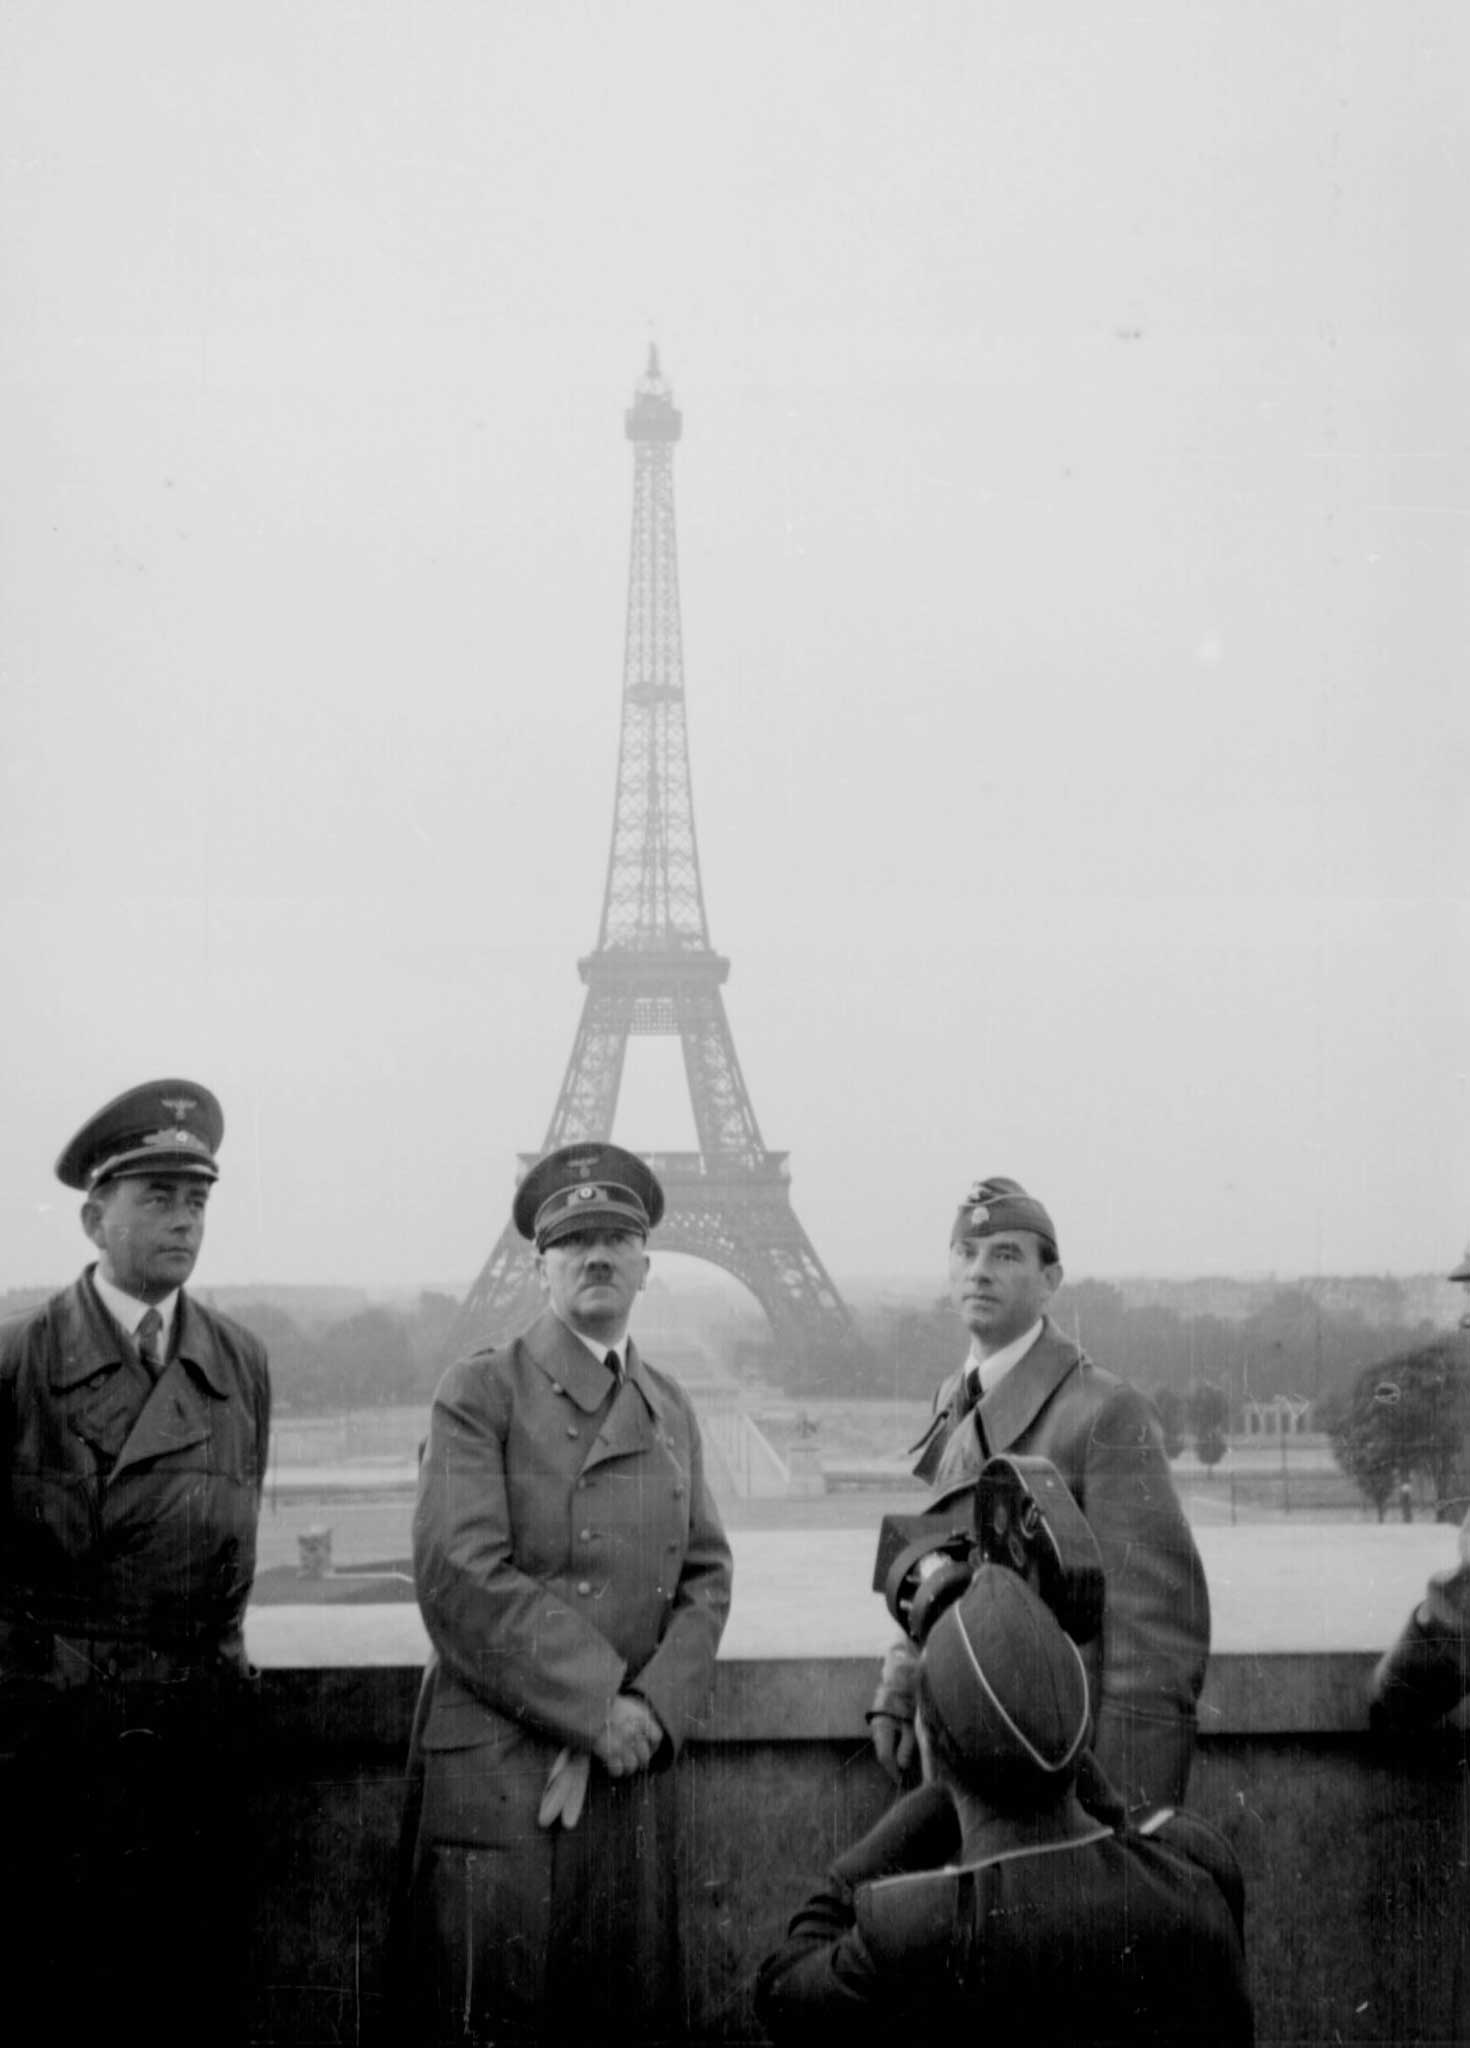 Hitler in Paris in 1940, soon after the German invasion